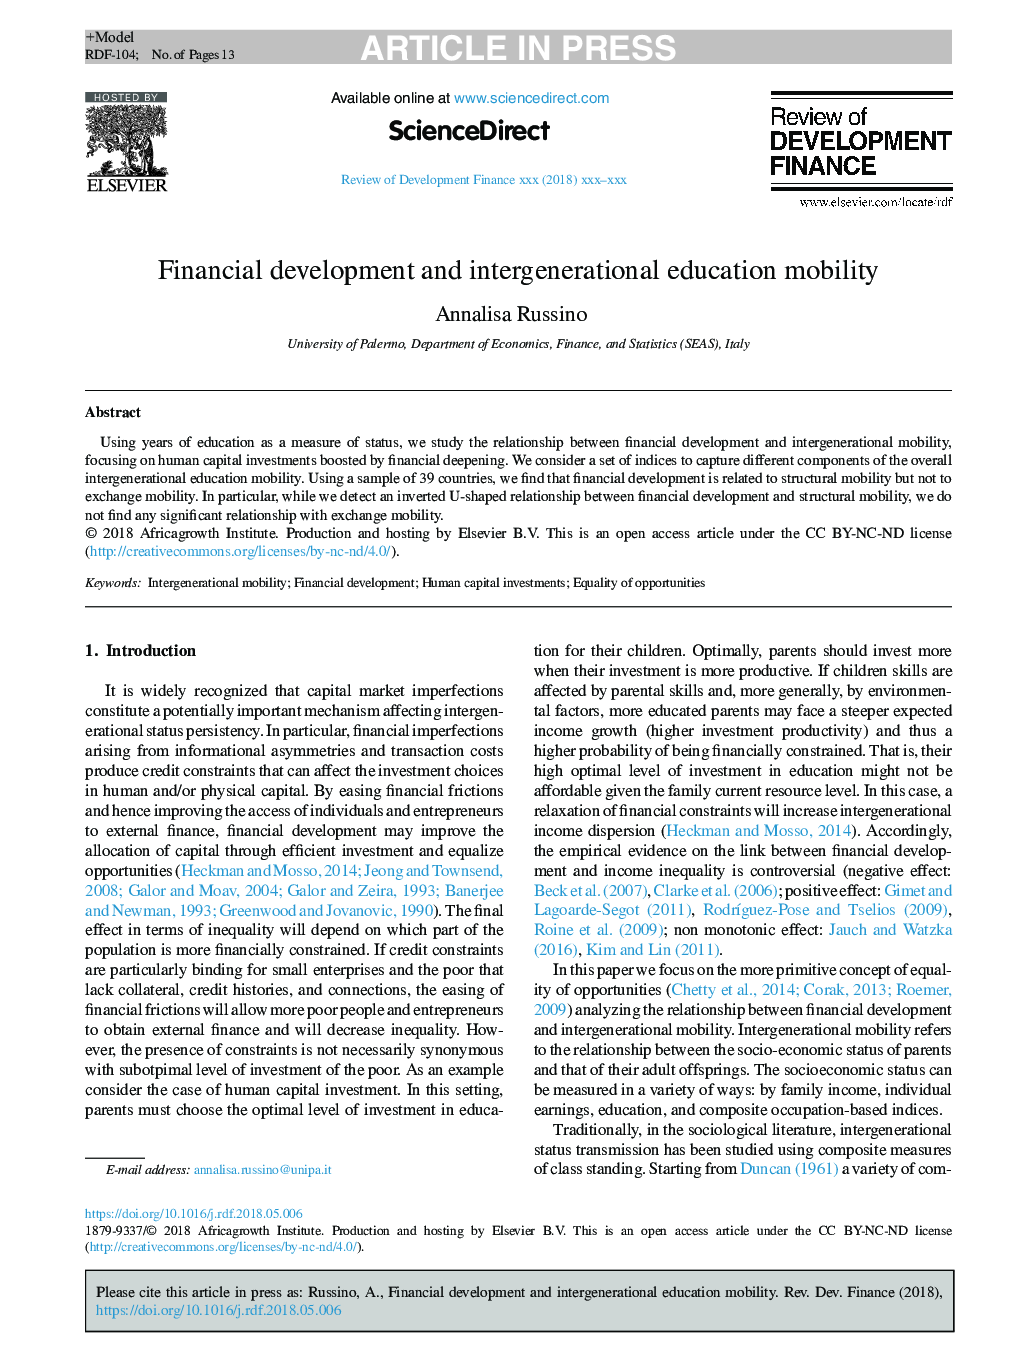 Financial development and intergenerational education mobility